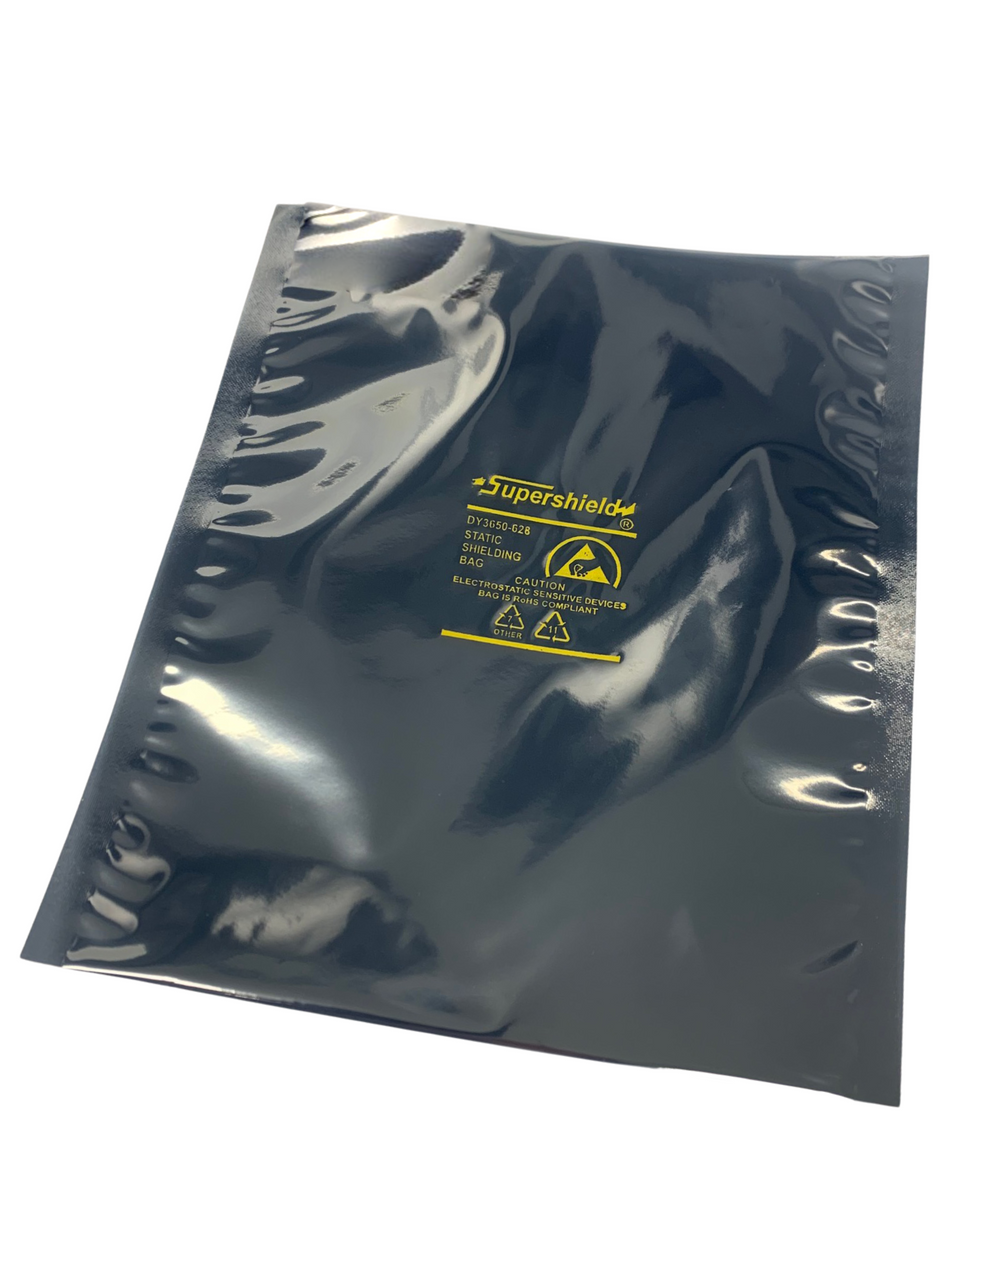 Dropship Pack Of 5 Insulated Thermal Bubble Bags With Hand Hole.  Lightweight High Capacity Metallized Foil Tote Bag 8x8x12 Easy Use Adhesive  Tape Seal Closure. Perfect For Hot Or Cold Food Deliveries.